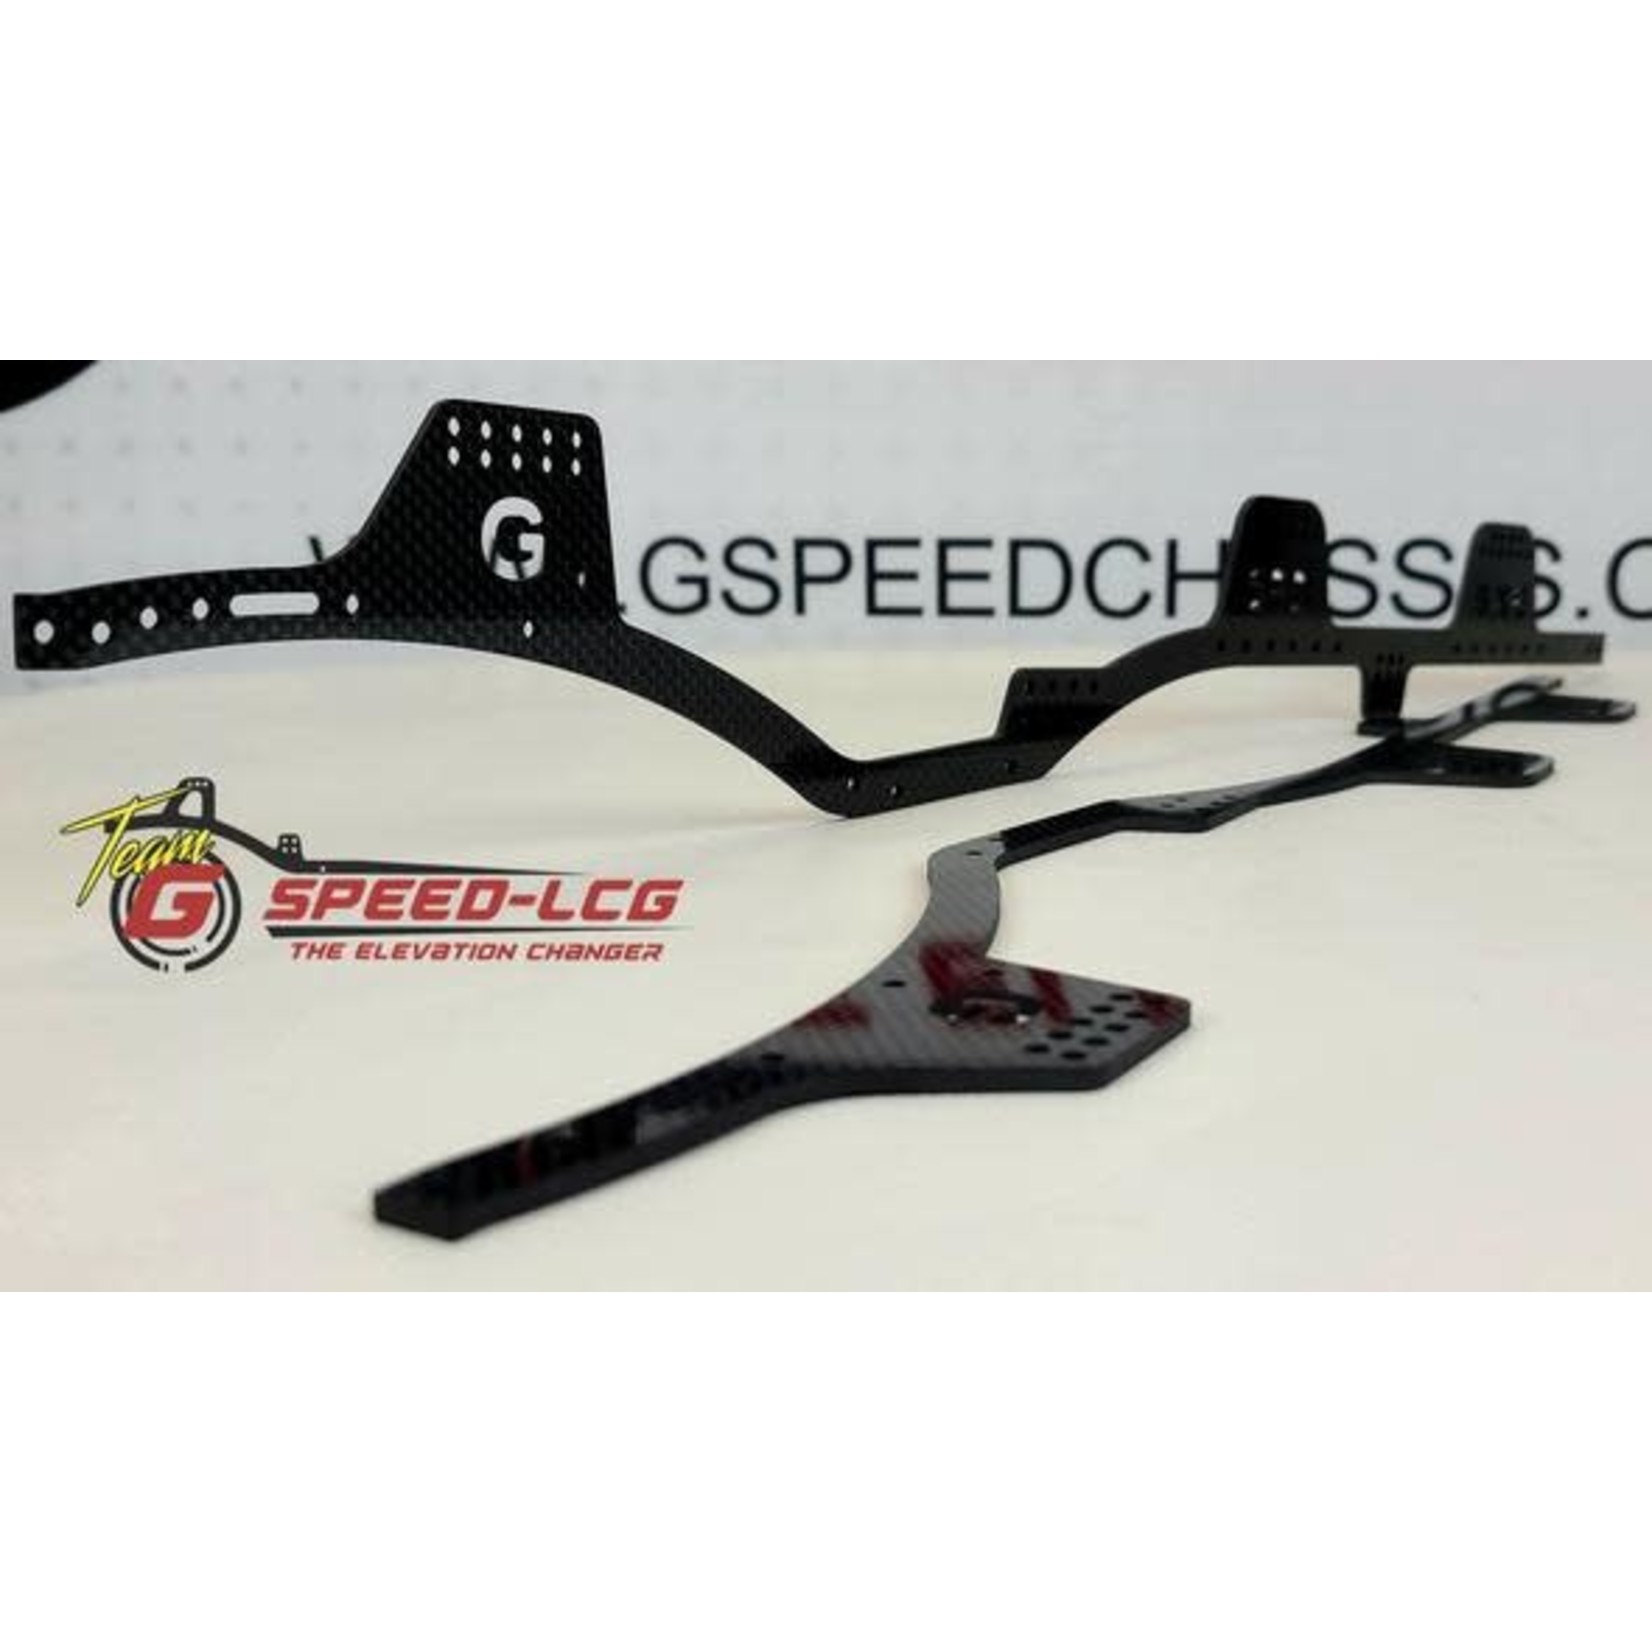 Team G-Speed GSPEED G-6X6 Chassis for custom 6x6 builds, carbon fiber (rails only) # V36x6